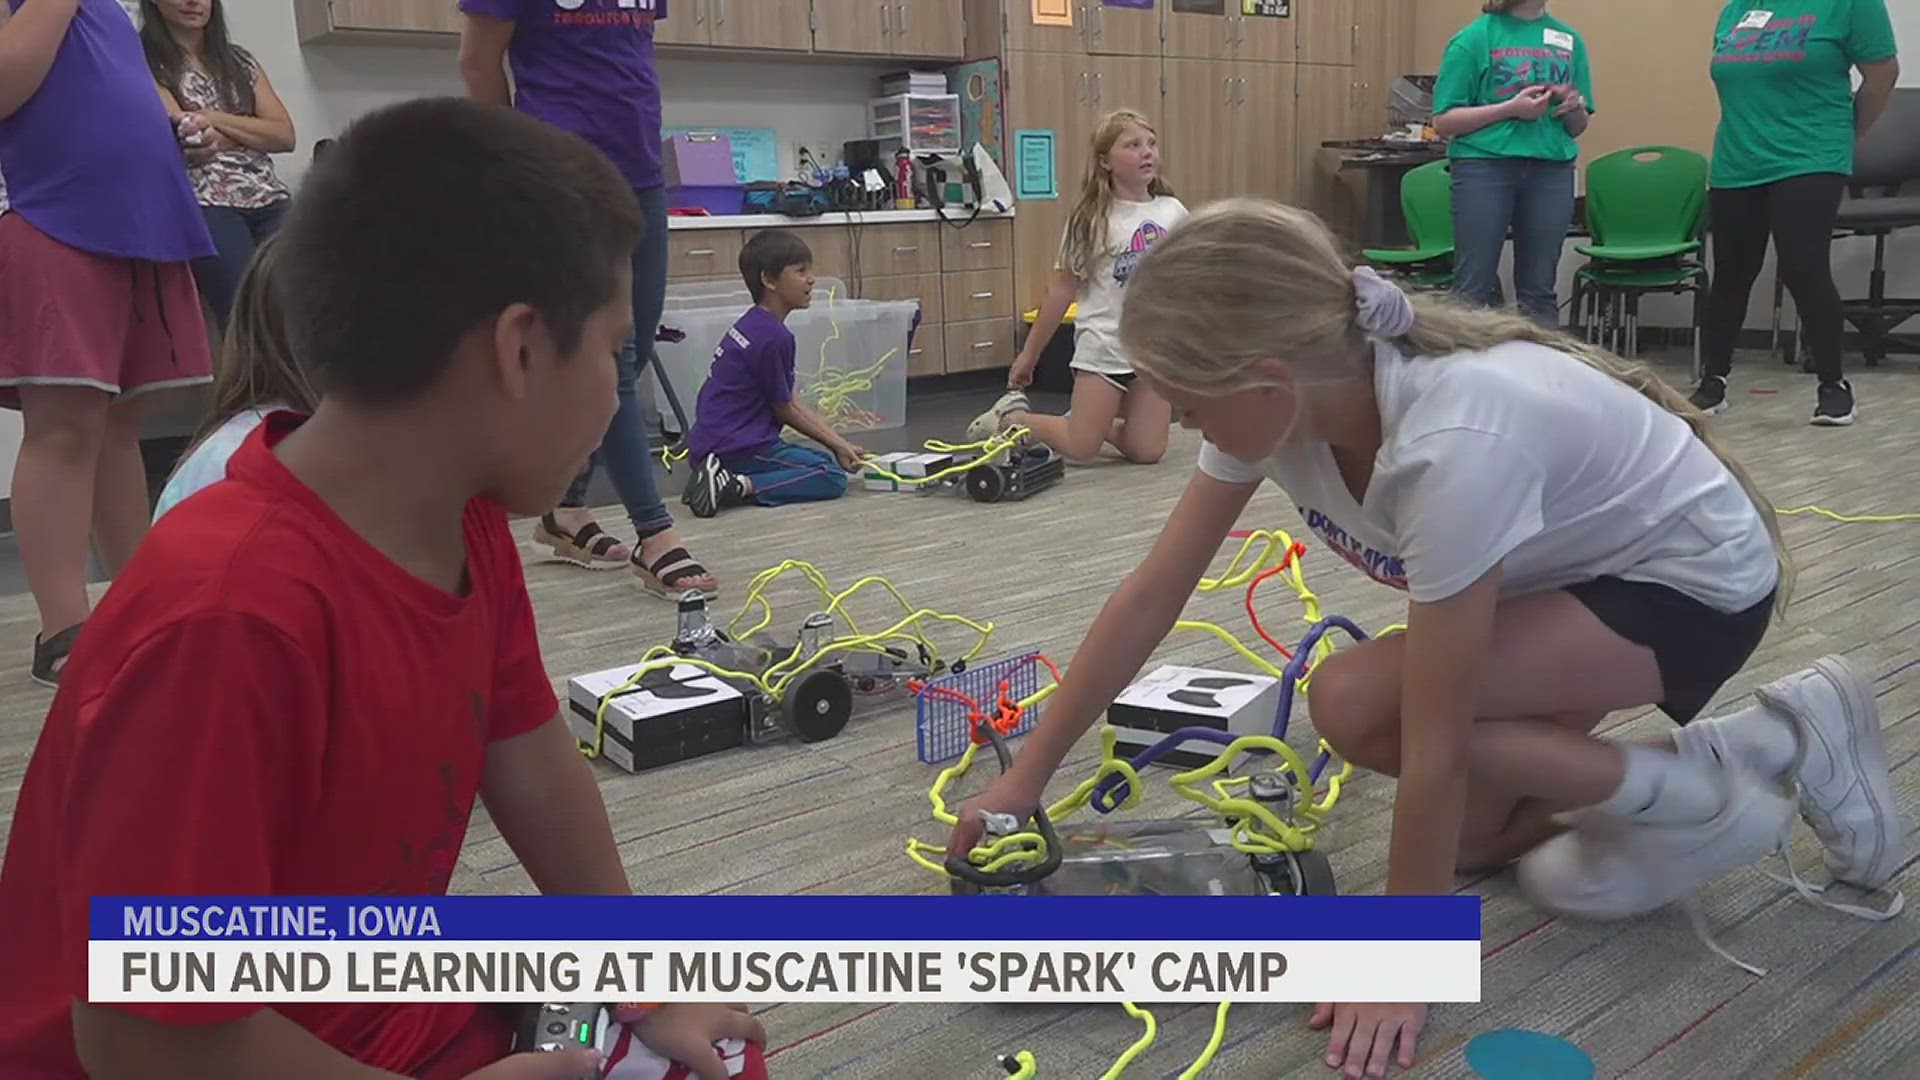 The Muskie S.P.A.R.K. program is giving kids daytime lessons and afternoon hands-on activities, teaching robotics, cooking, engineering and more.